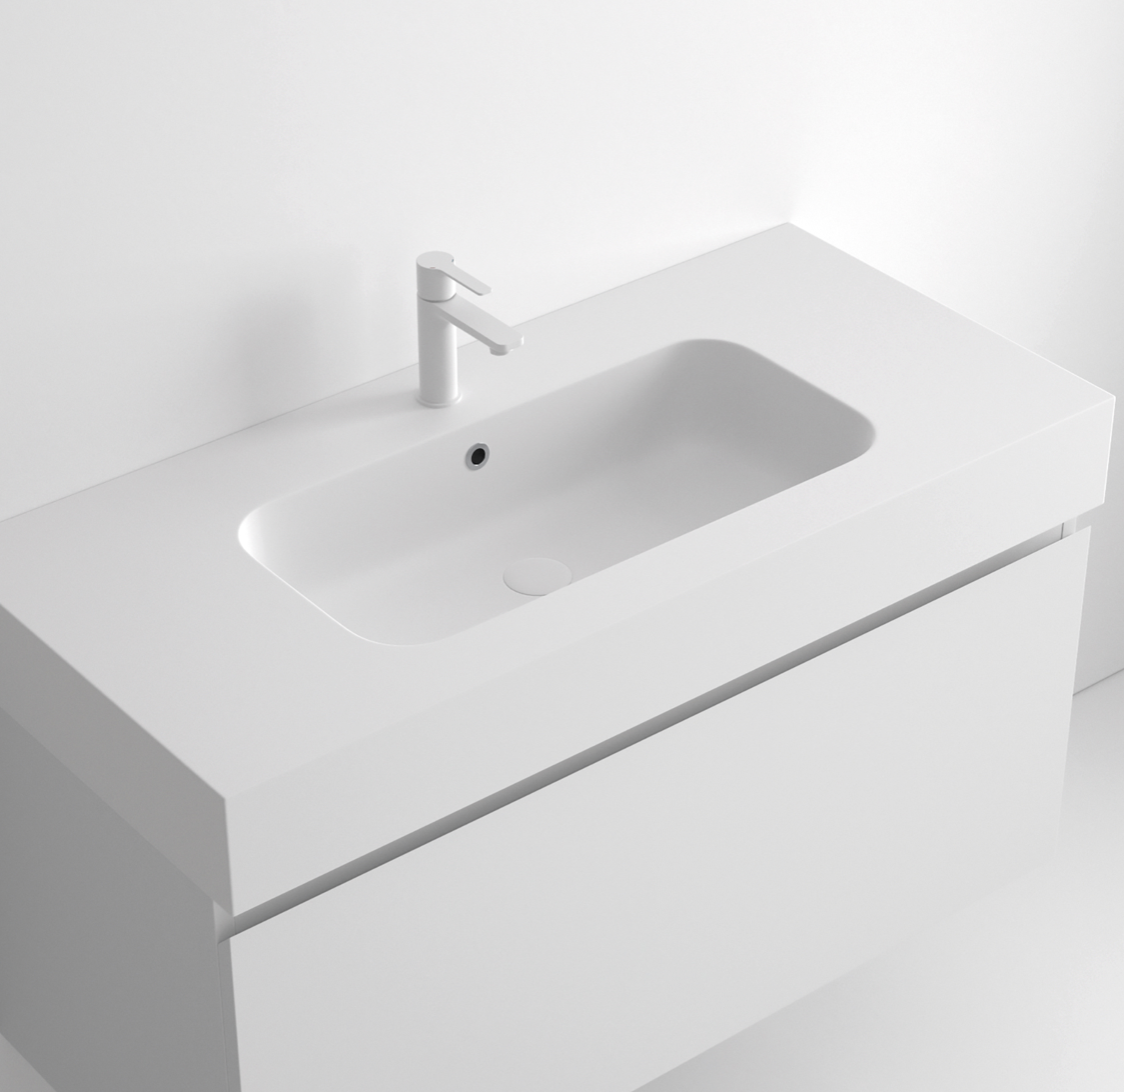 Countertop with skirt and integrated basin Compaclemos by Maderó Atelier